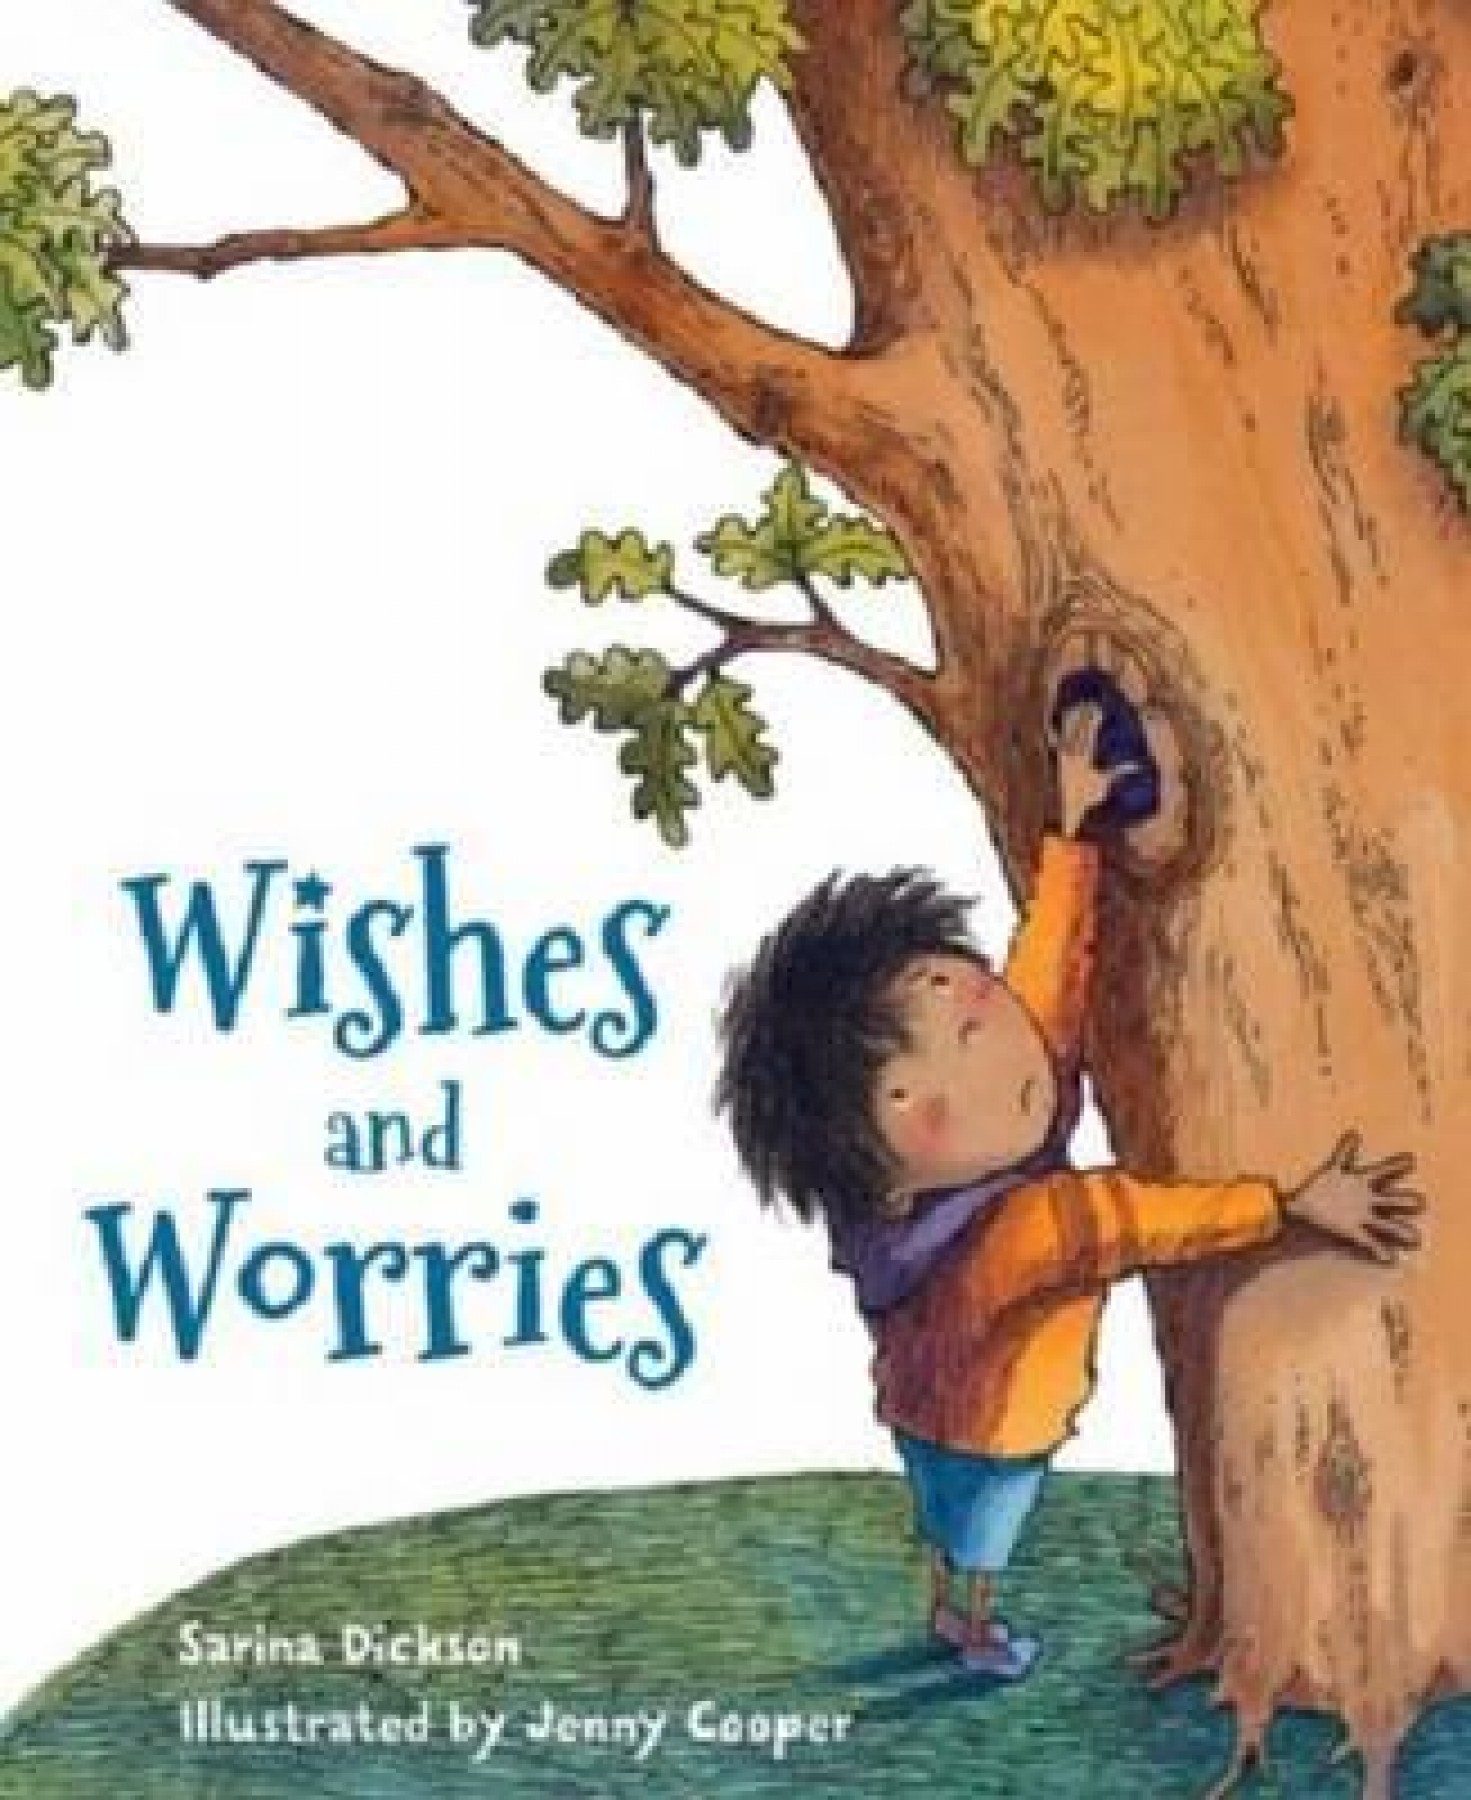 Wishes and worries